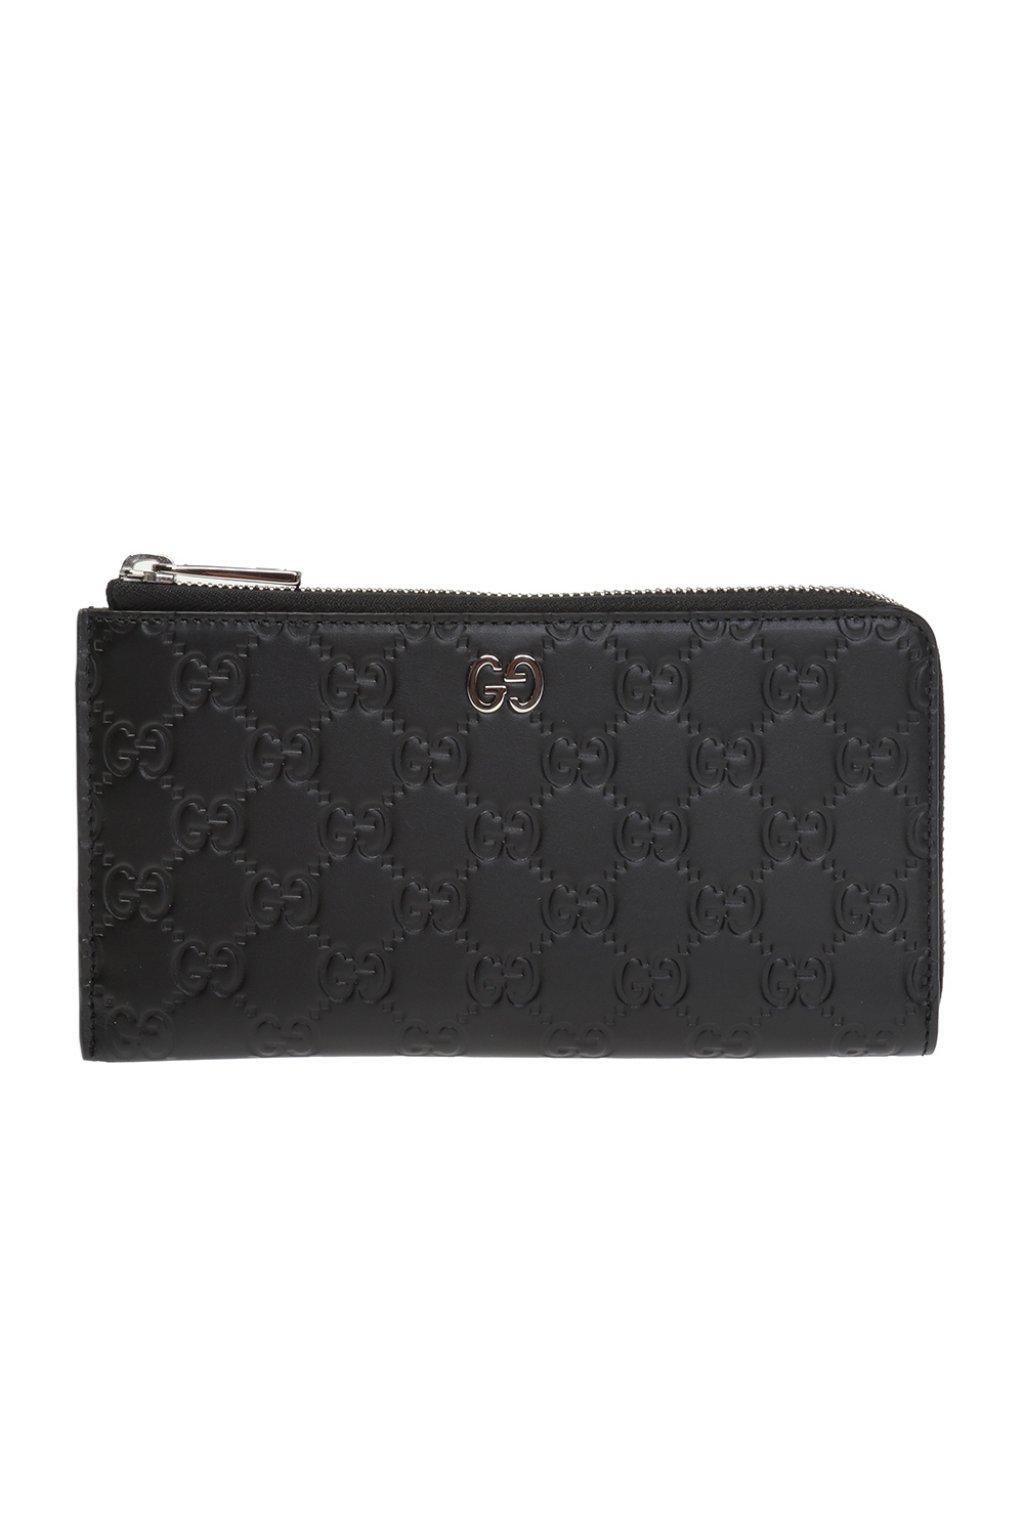 Gucci Leather Embossed Wallet in Black for Men - Lyst